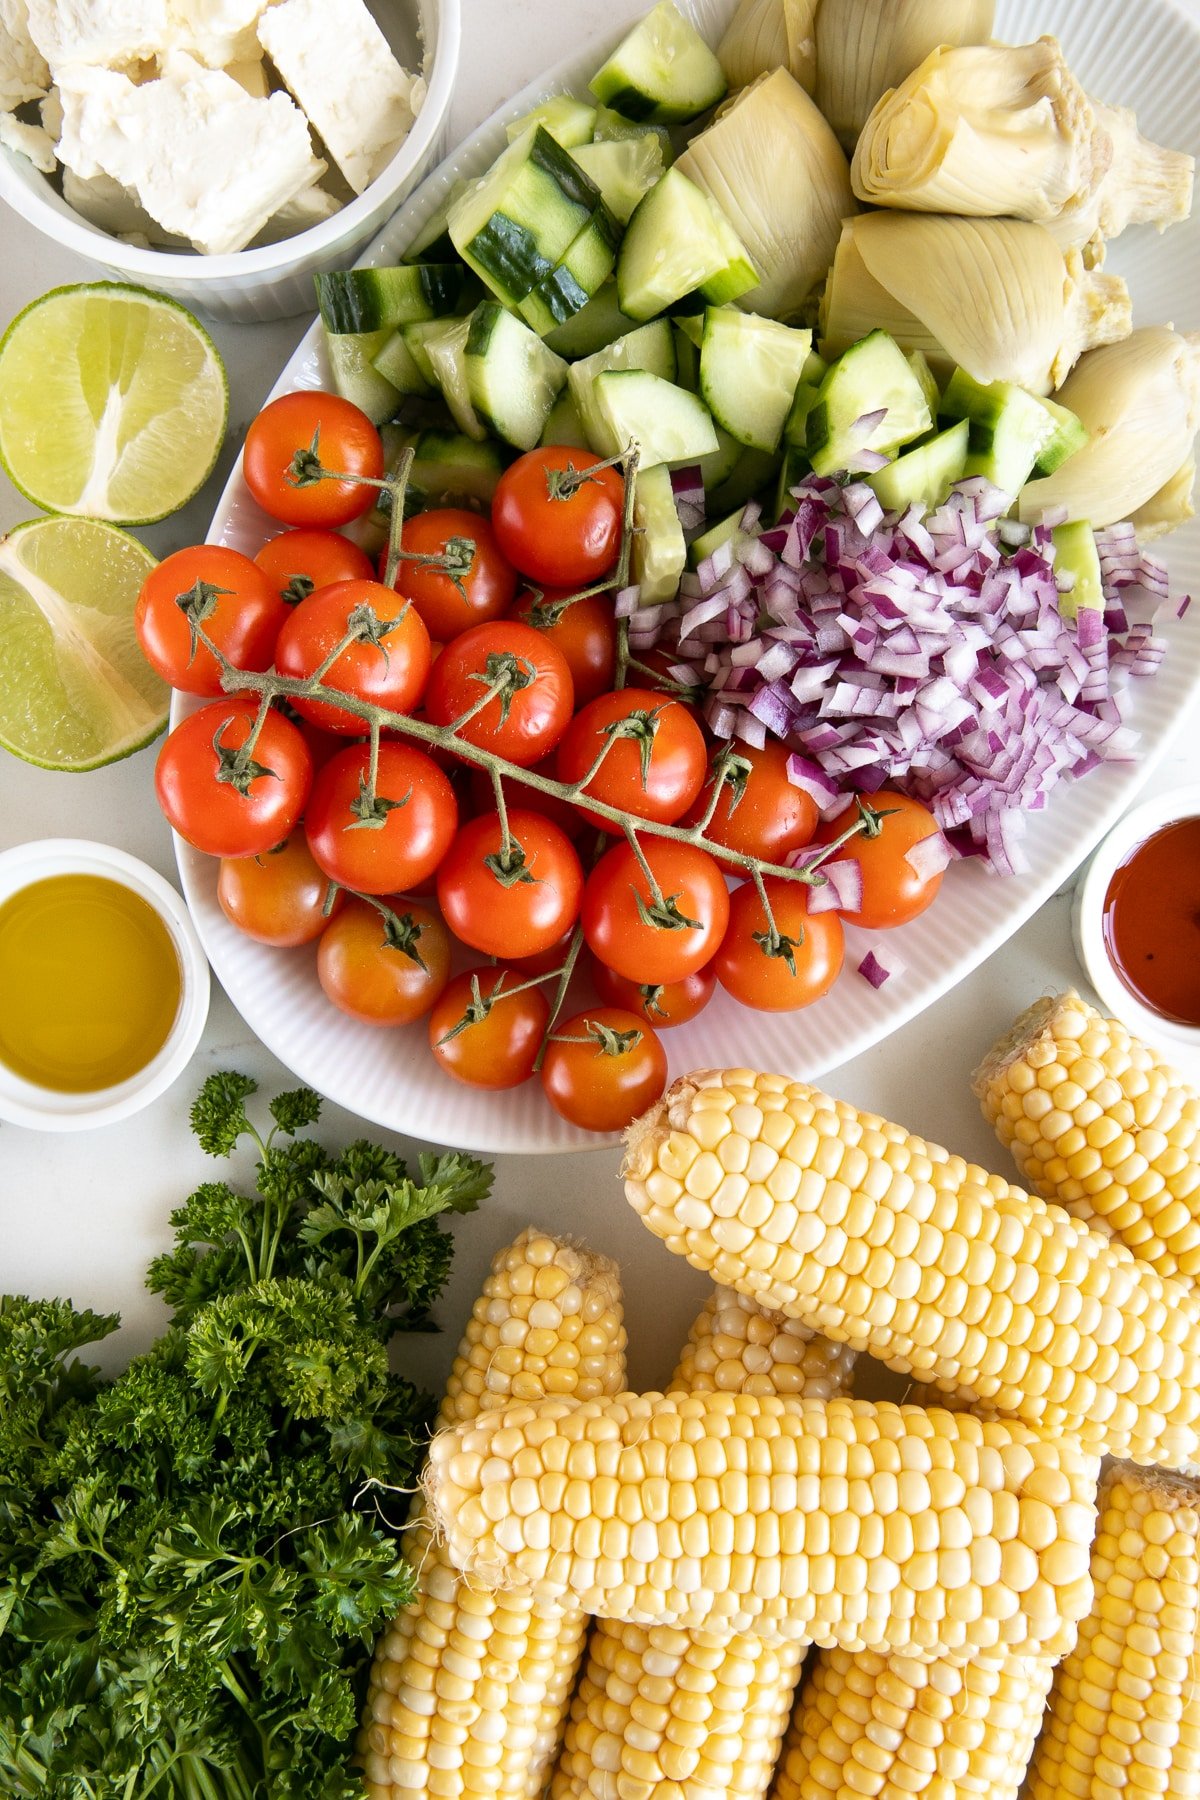 Ingredients in corn salad spread out over a large white table.